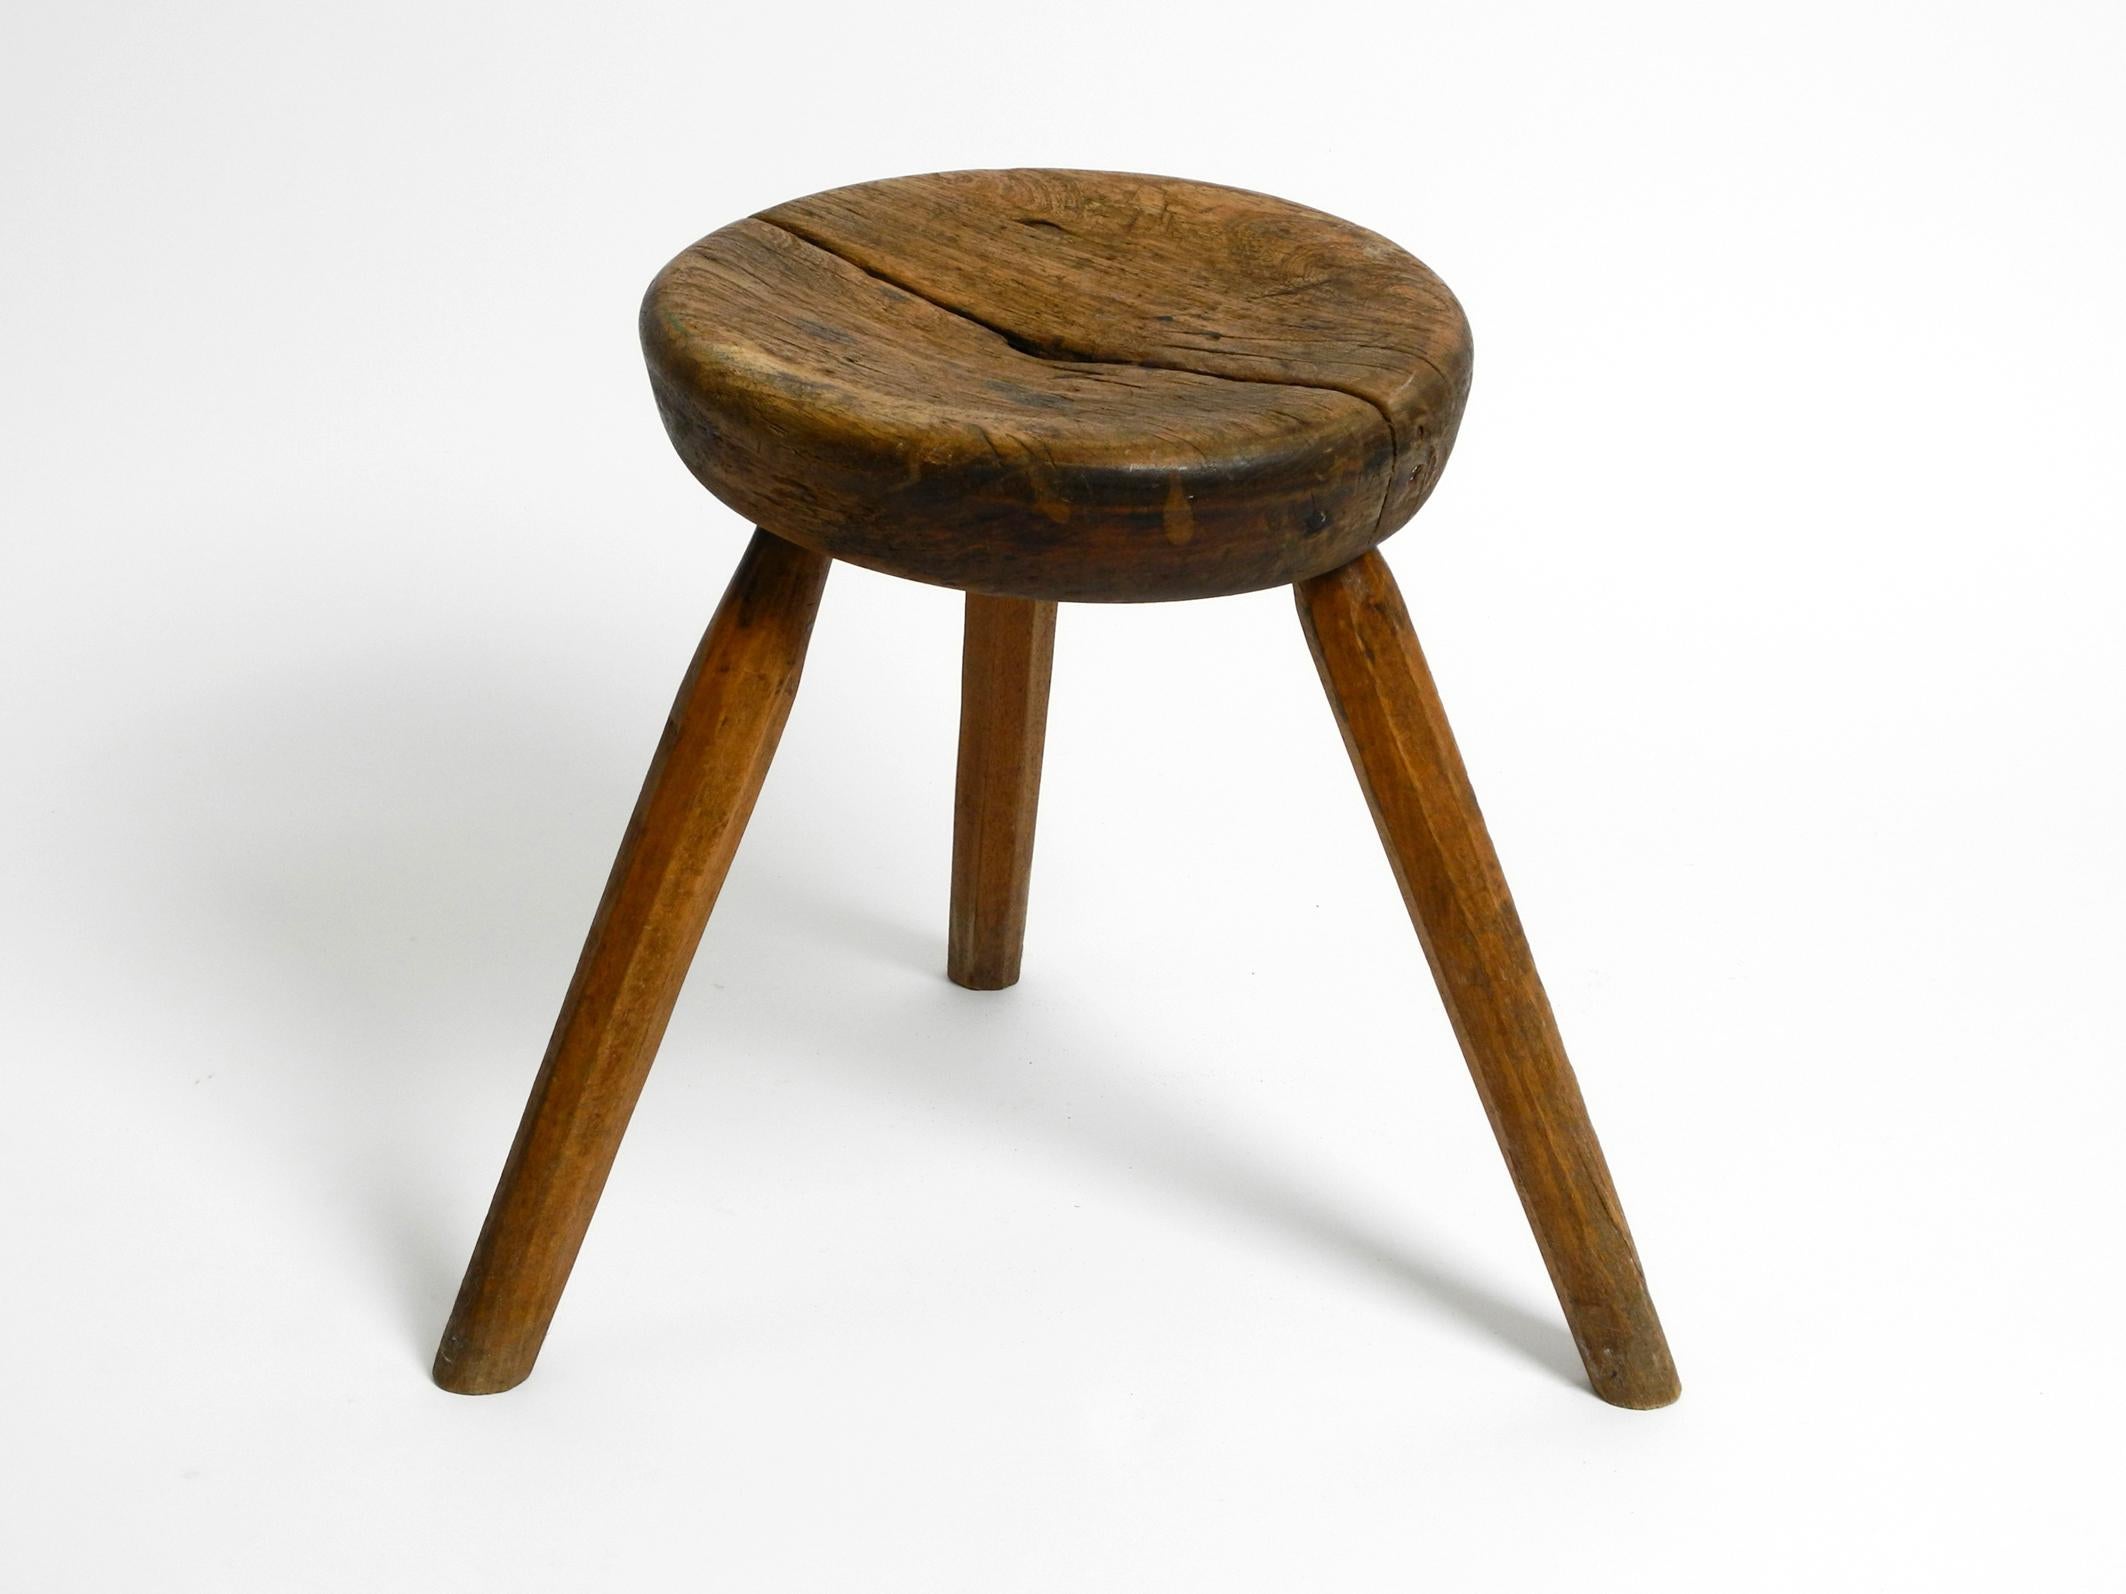 Beautiful original French tripod mid century solid wood stool.
Great mid century design with a wonderfully beautiful patina.
Very robust and heavy built can also be used as a small side table.
Seat consists of two halves.
Not wobbly, everything